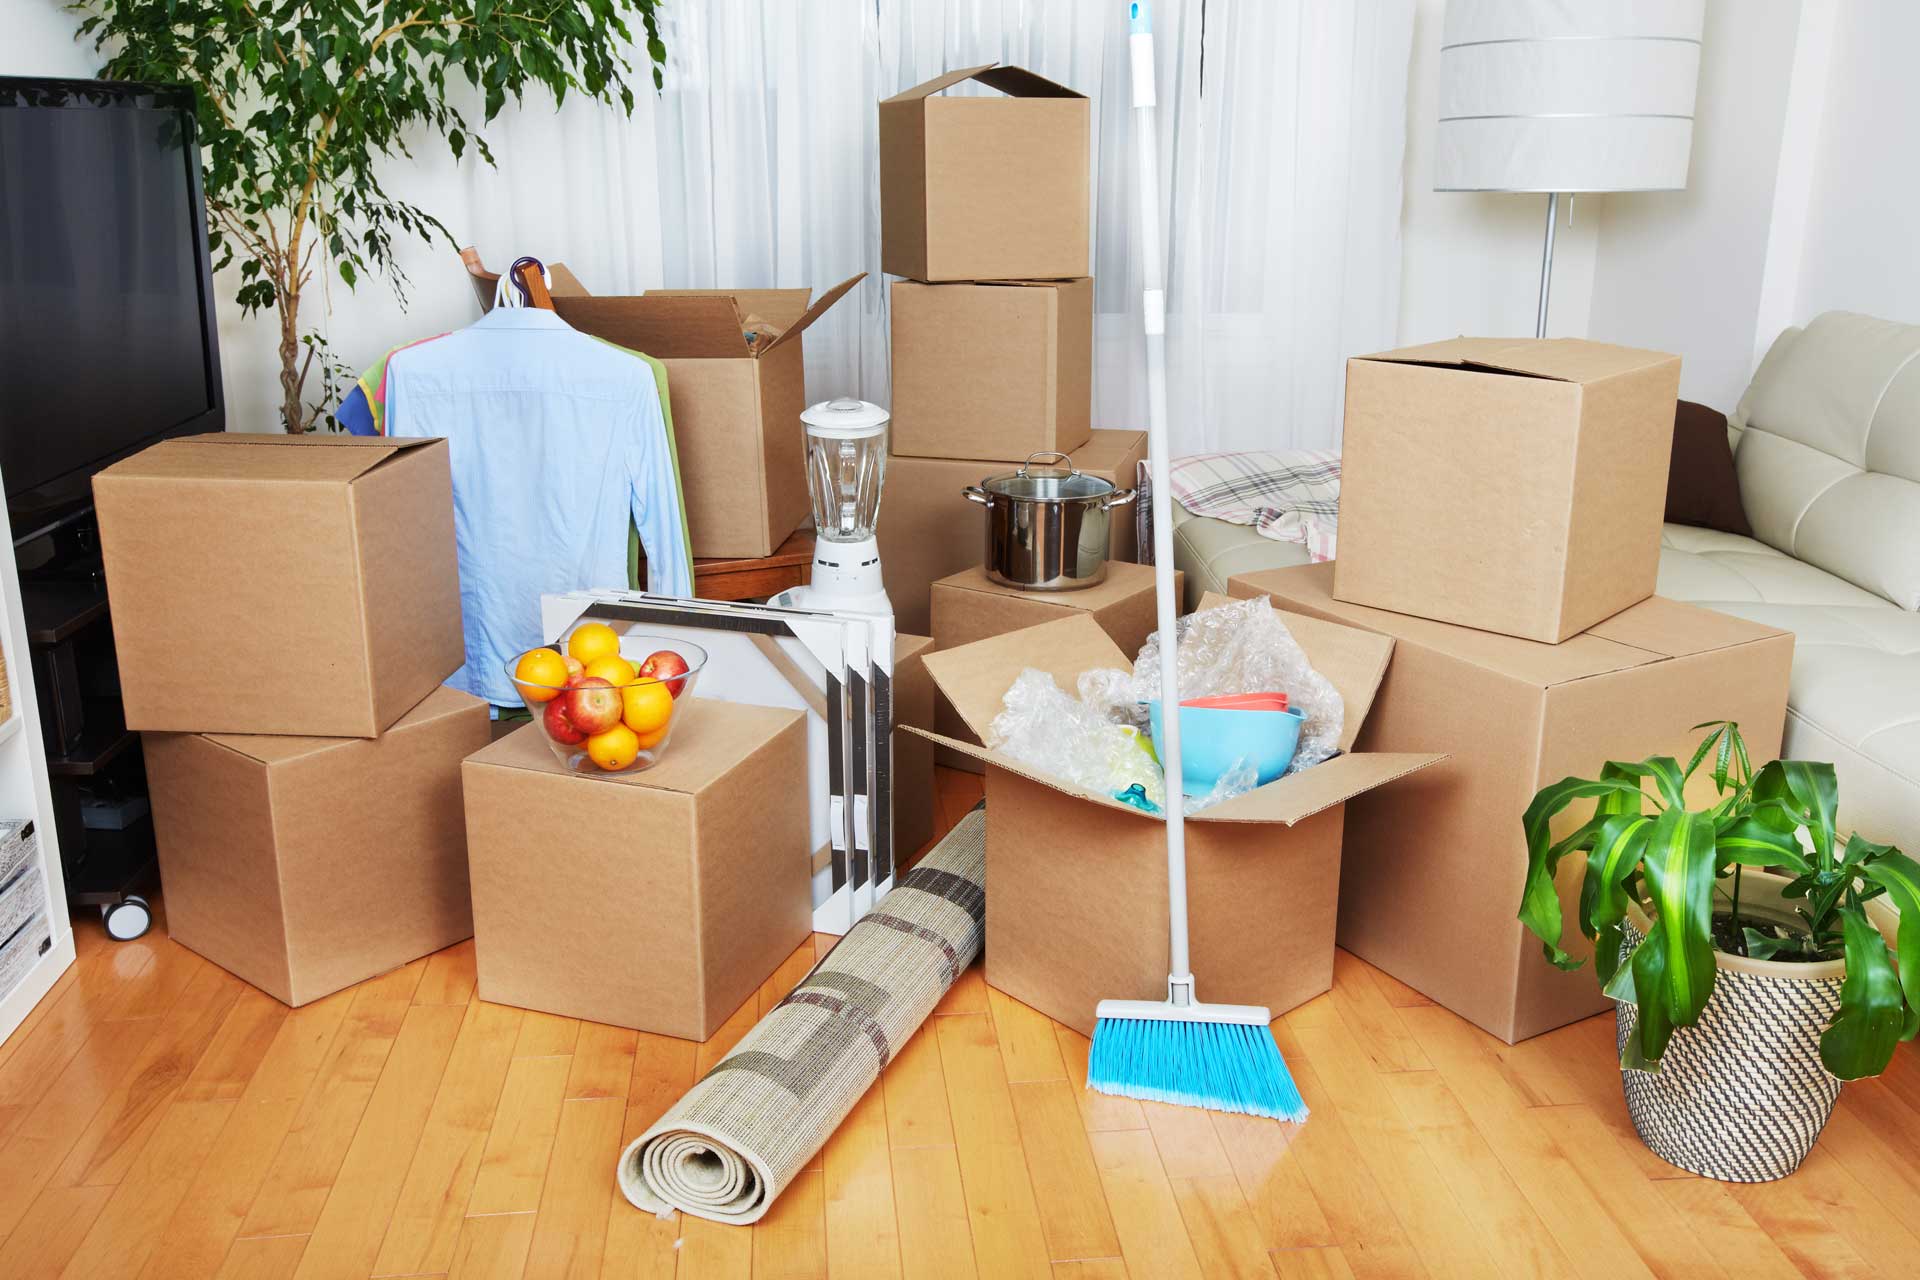 move-in-cleaning-services-brown-boxes